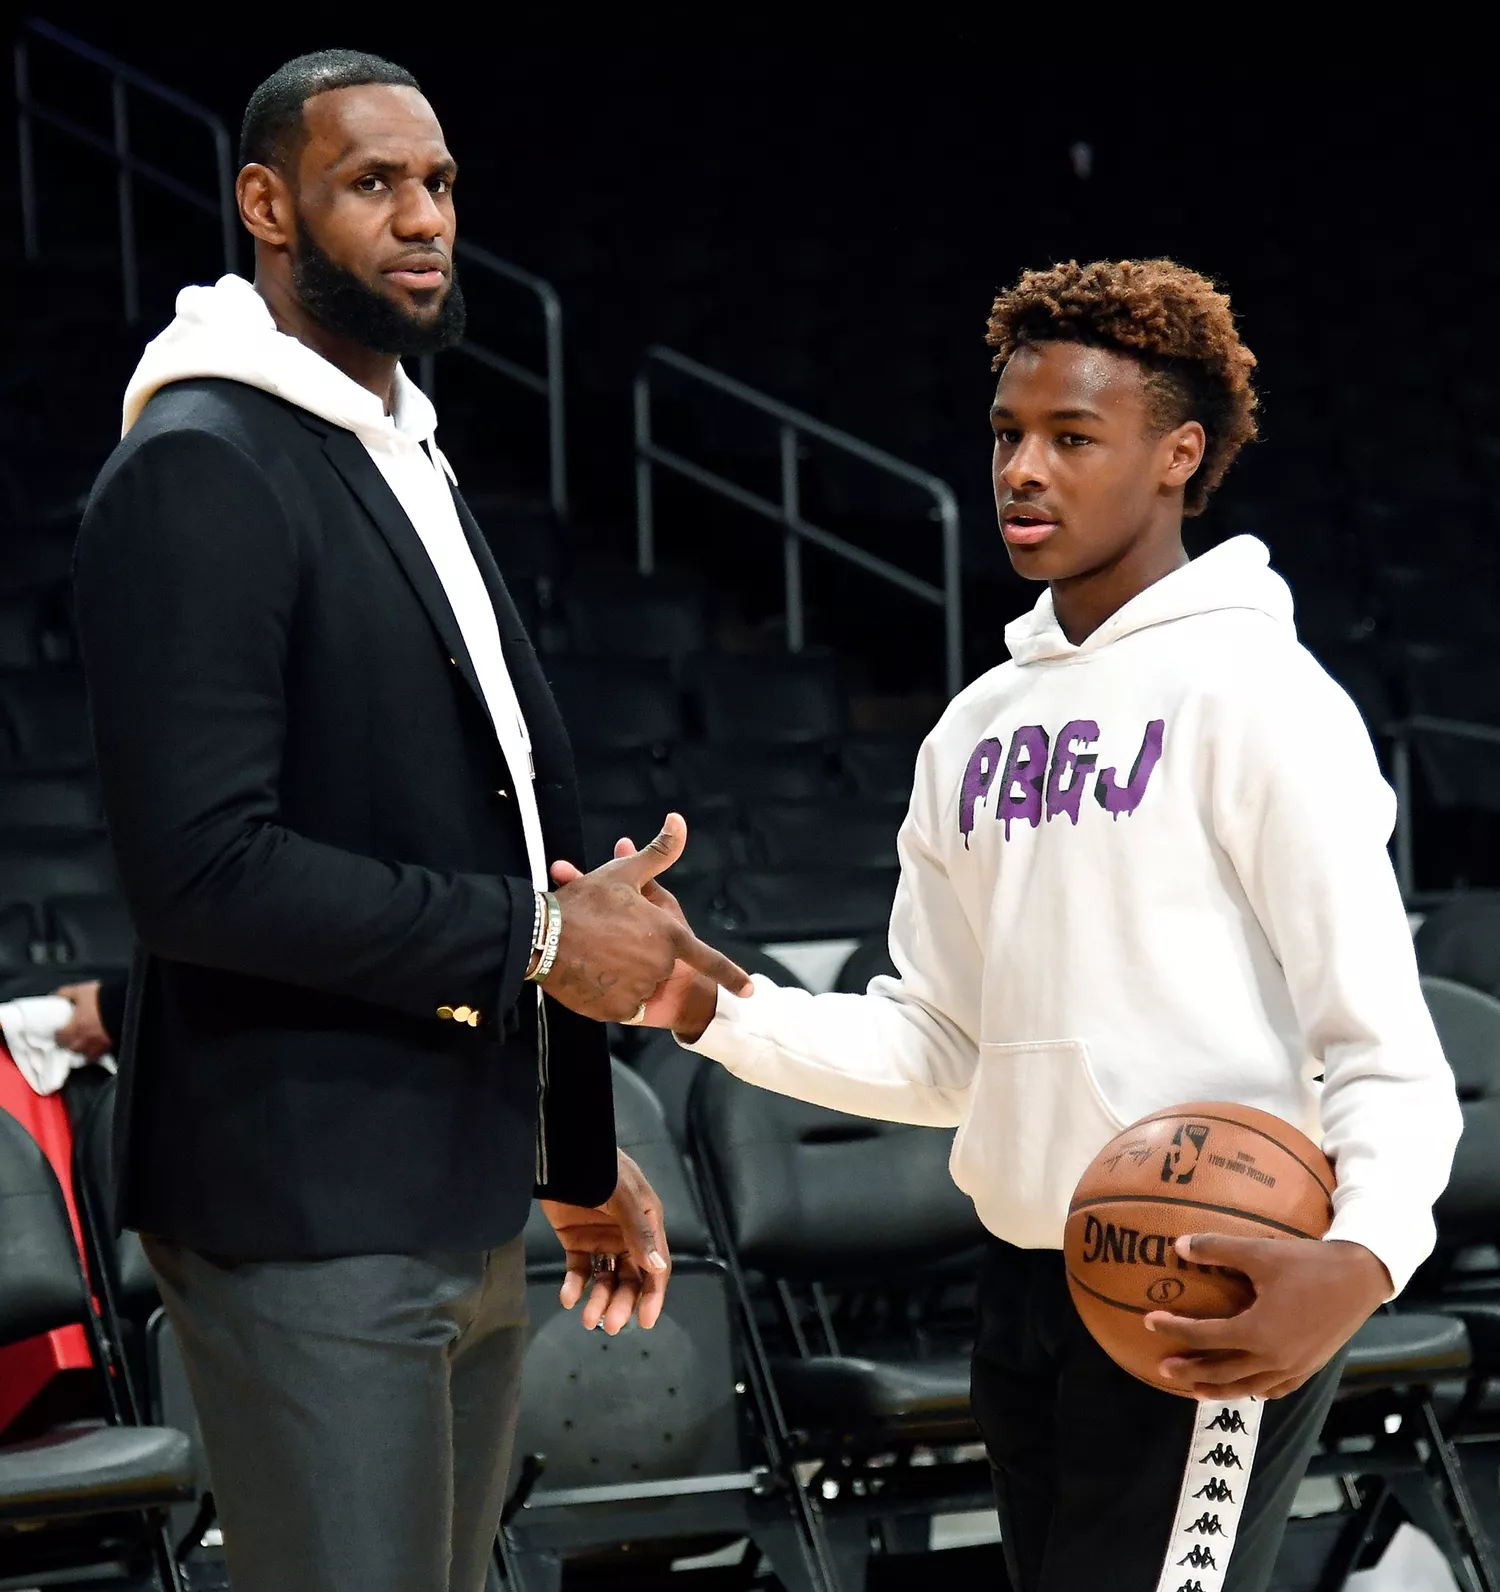 LeBron James #23 of the Los Angeles Lakers and his son LeBron James Jr